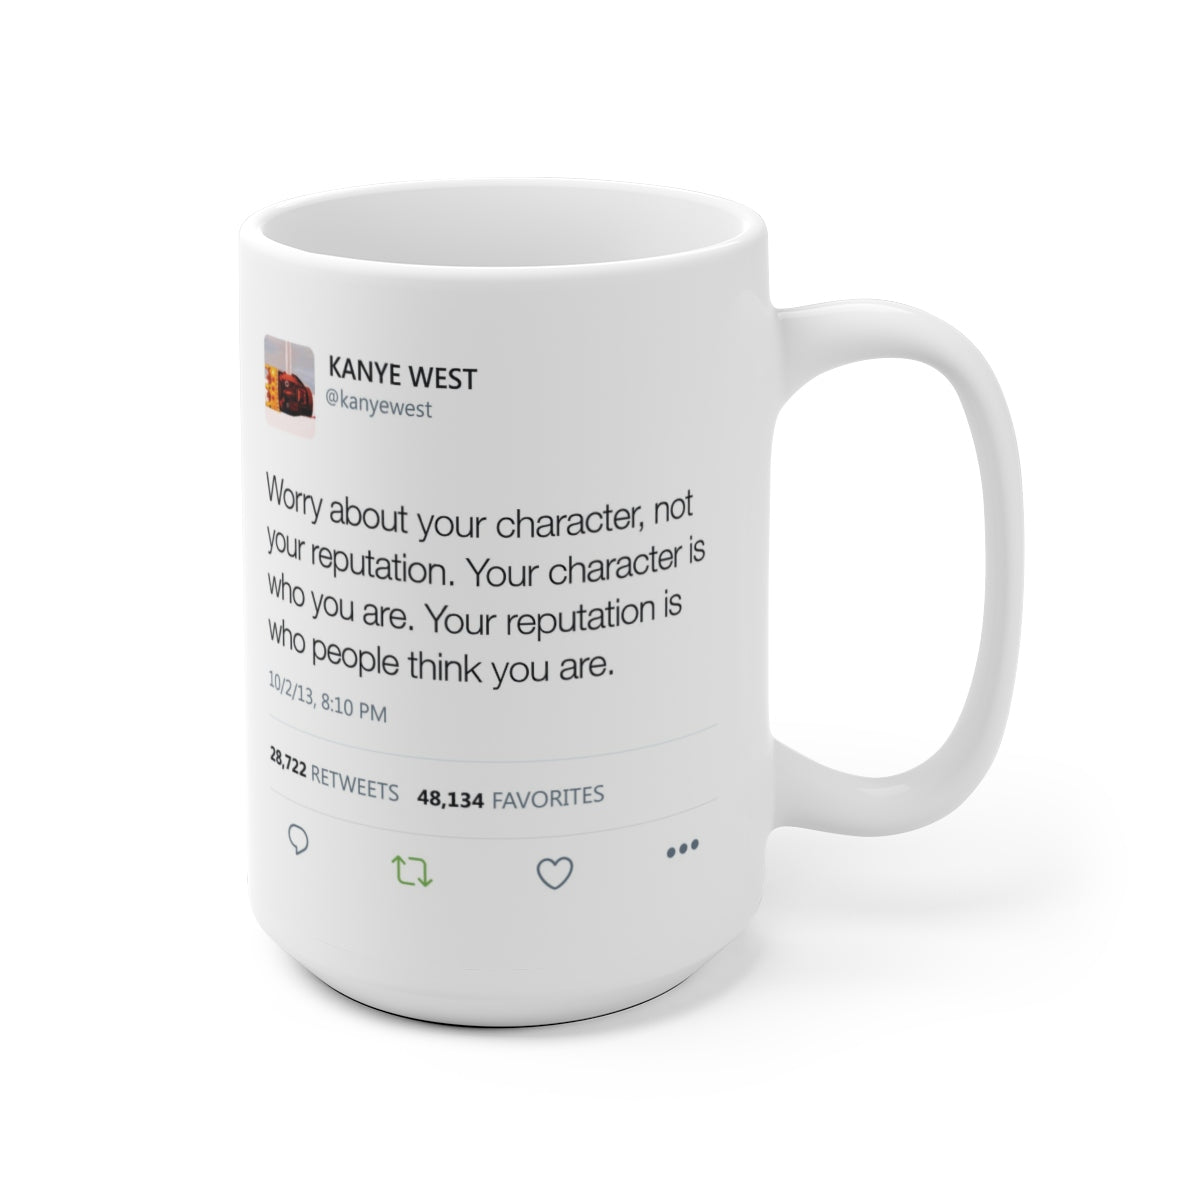 Worry about your character, not your reputation - Kanye West Tweet Mug-Archethype